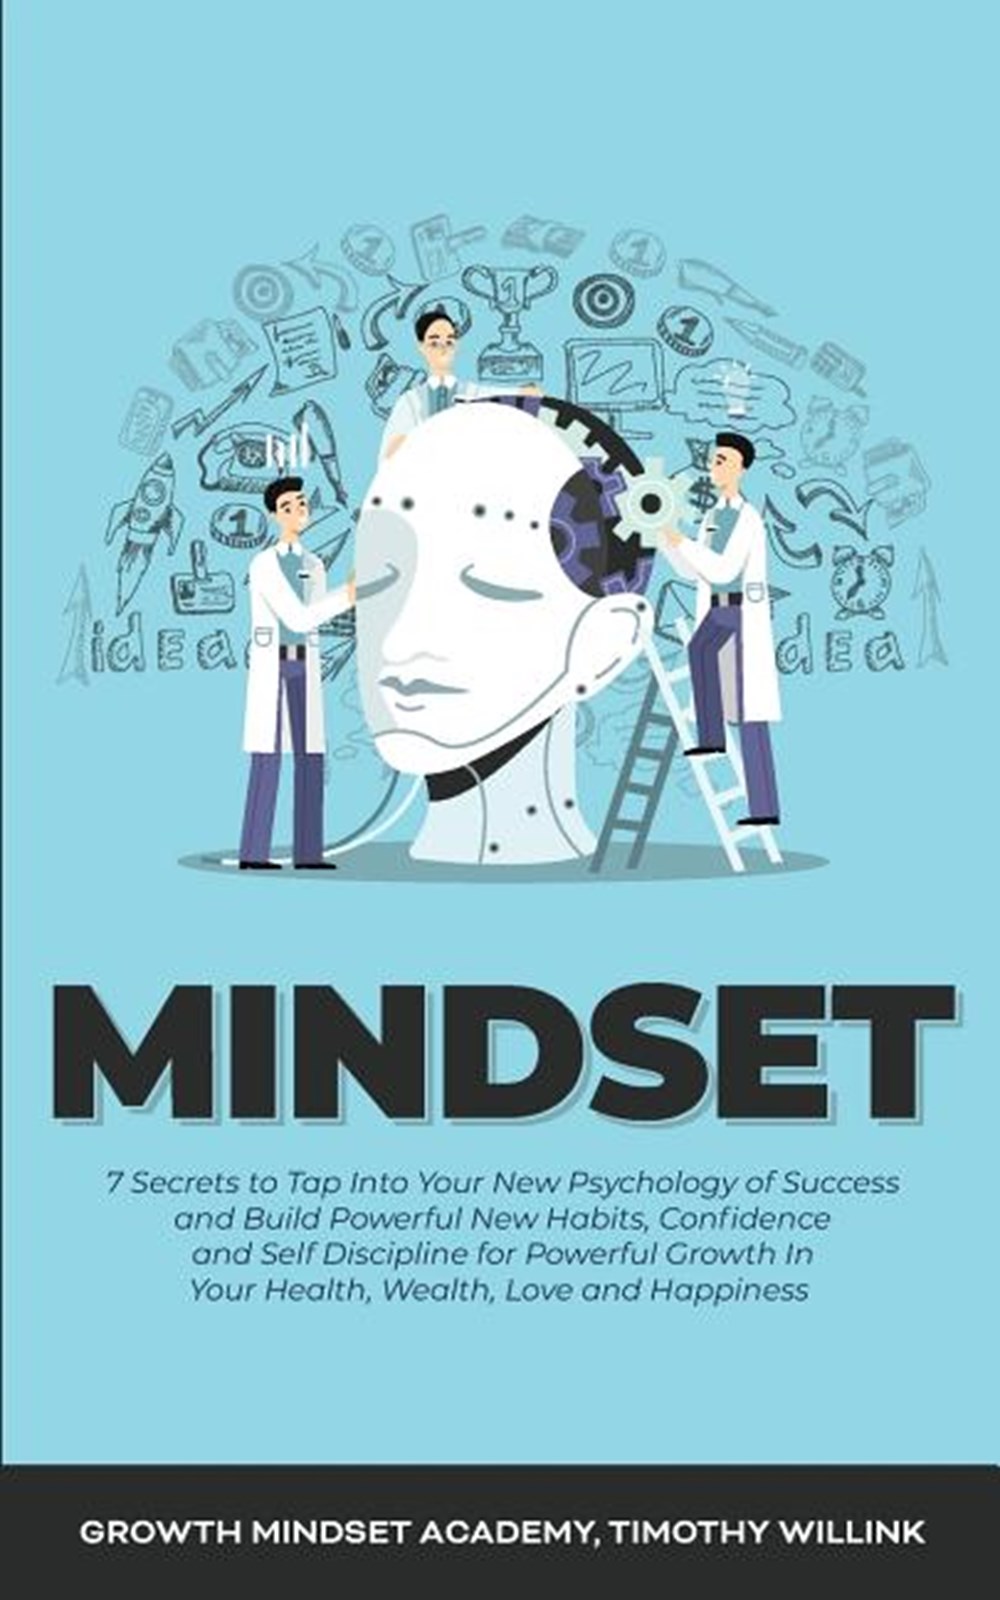 Mindset: 7 Secrets to Tap Into Your New Psychology of Success and Build Powerful New Habits, Confide